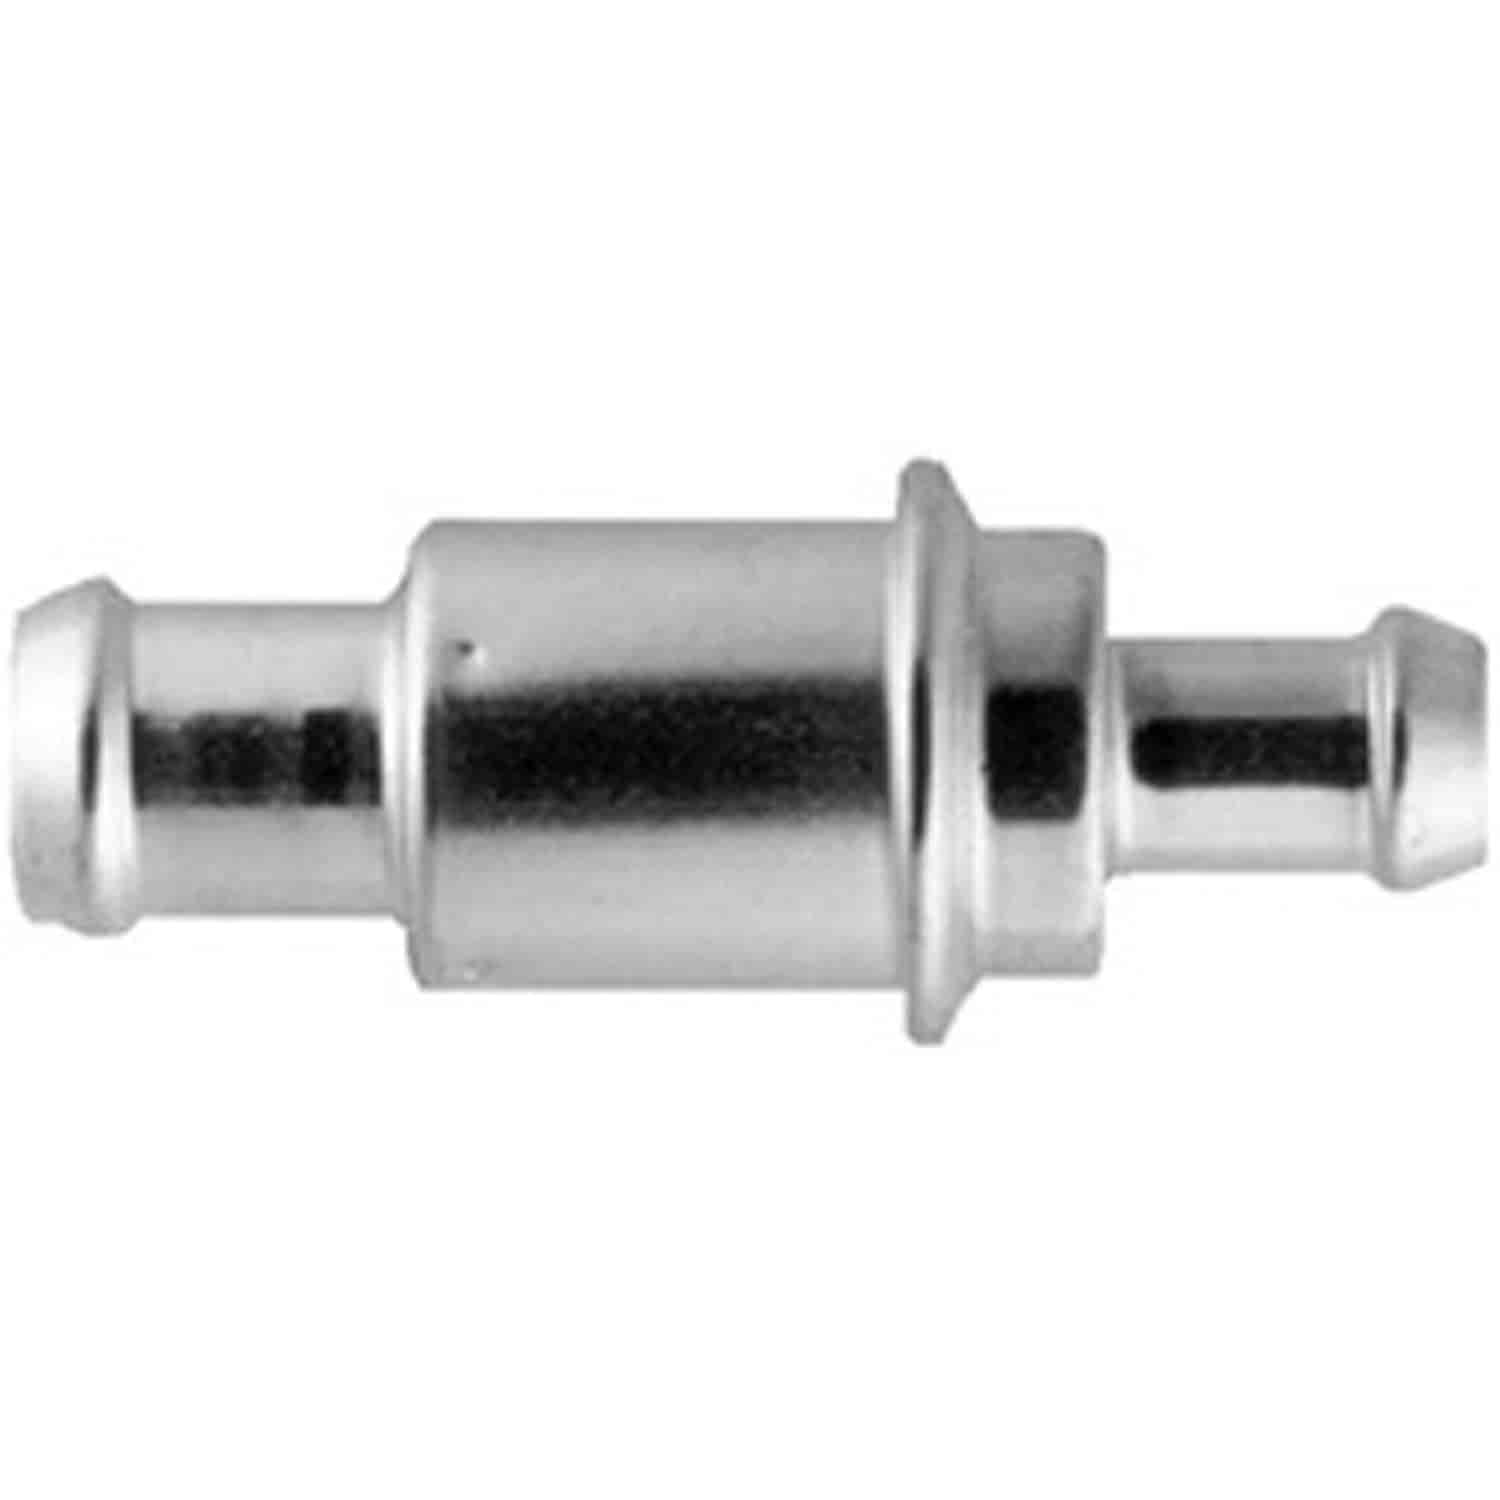 This PCV valve from Omix-ADA fits 66-71 Jeep CJ5 and CJ6 with 225 cubic inch engines.